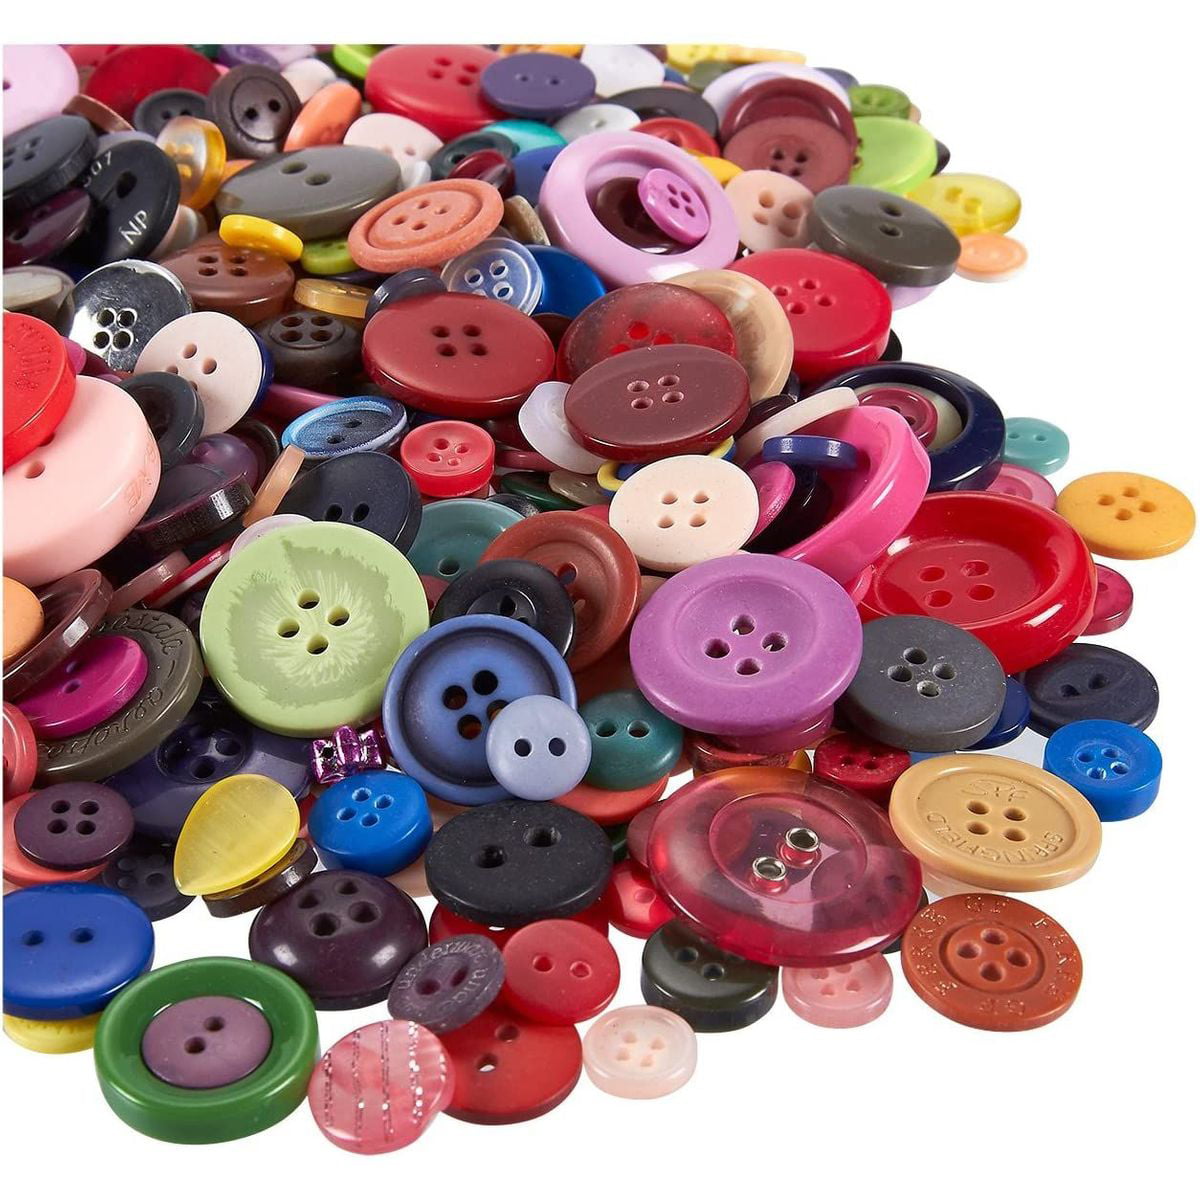 Assorted Mixed Buttons Arts Crafts Card Making Scrapbooking Sewing